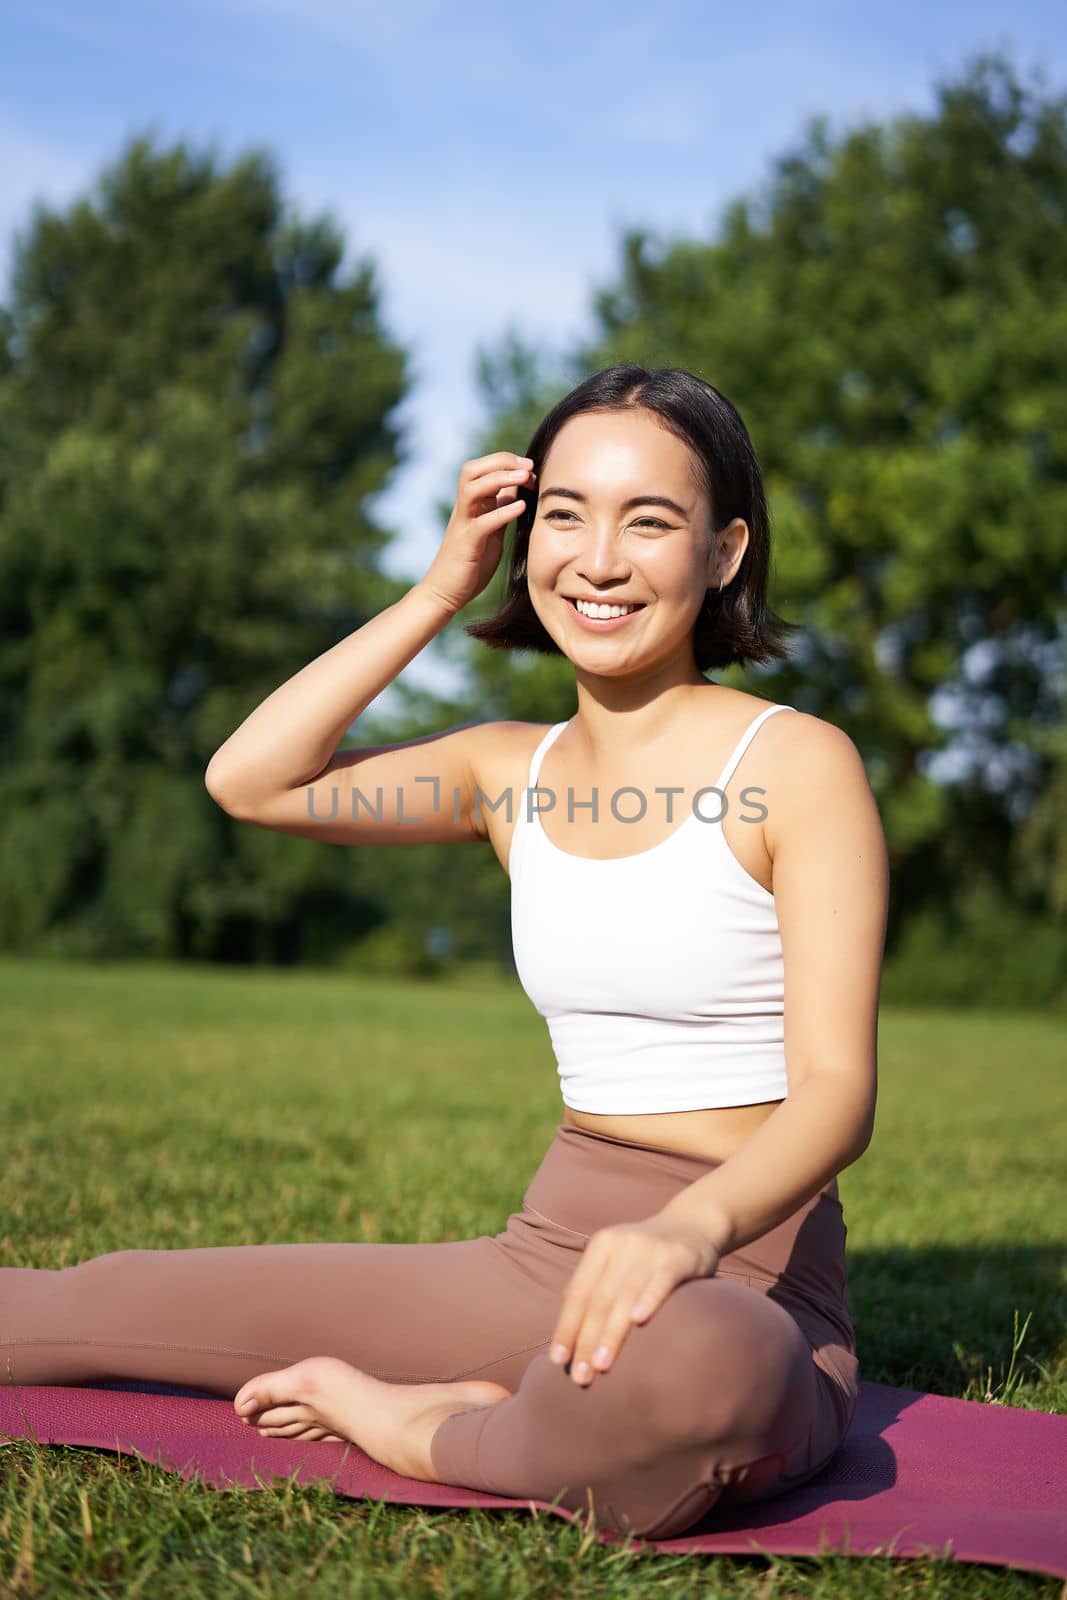 Meditation and mindfulness. Young asian woman smiling on fitness mat in park, doing yoga training, meditating on fresh air.